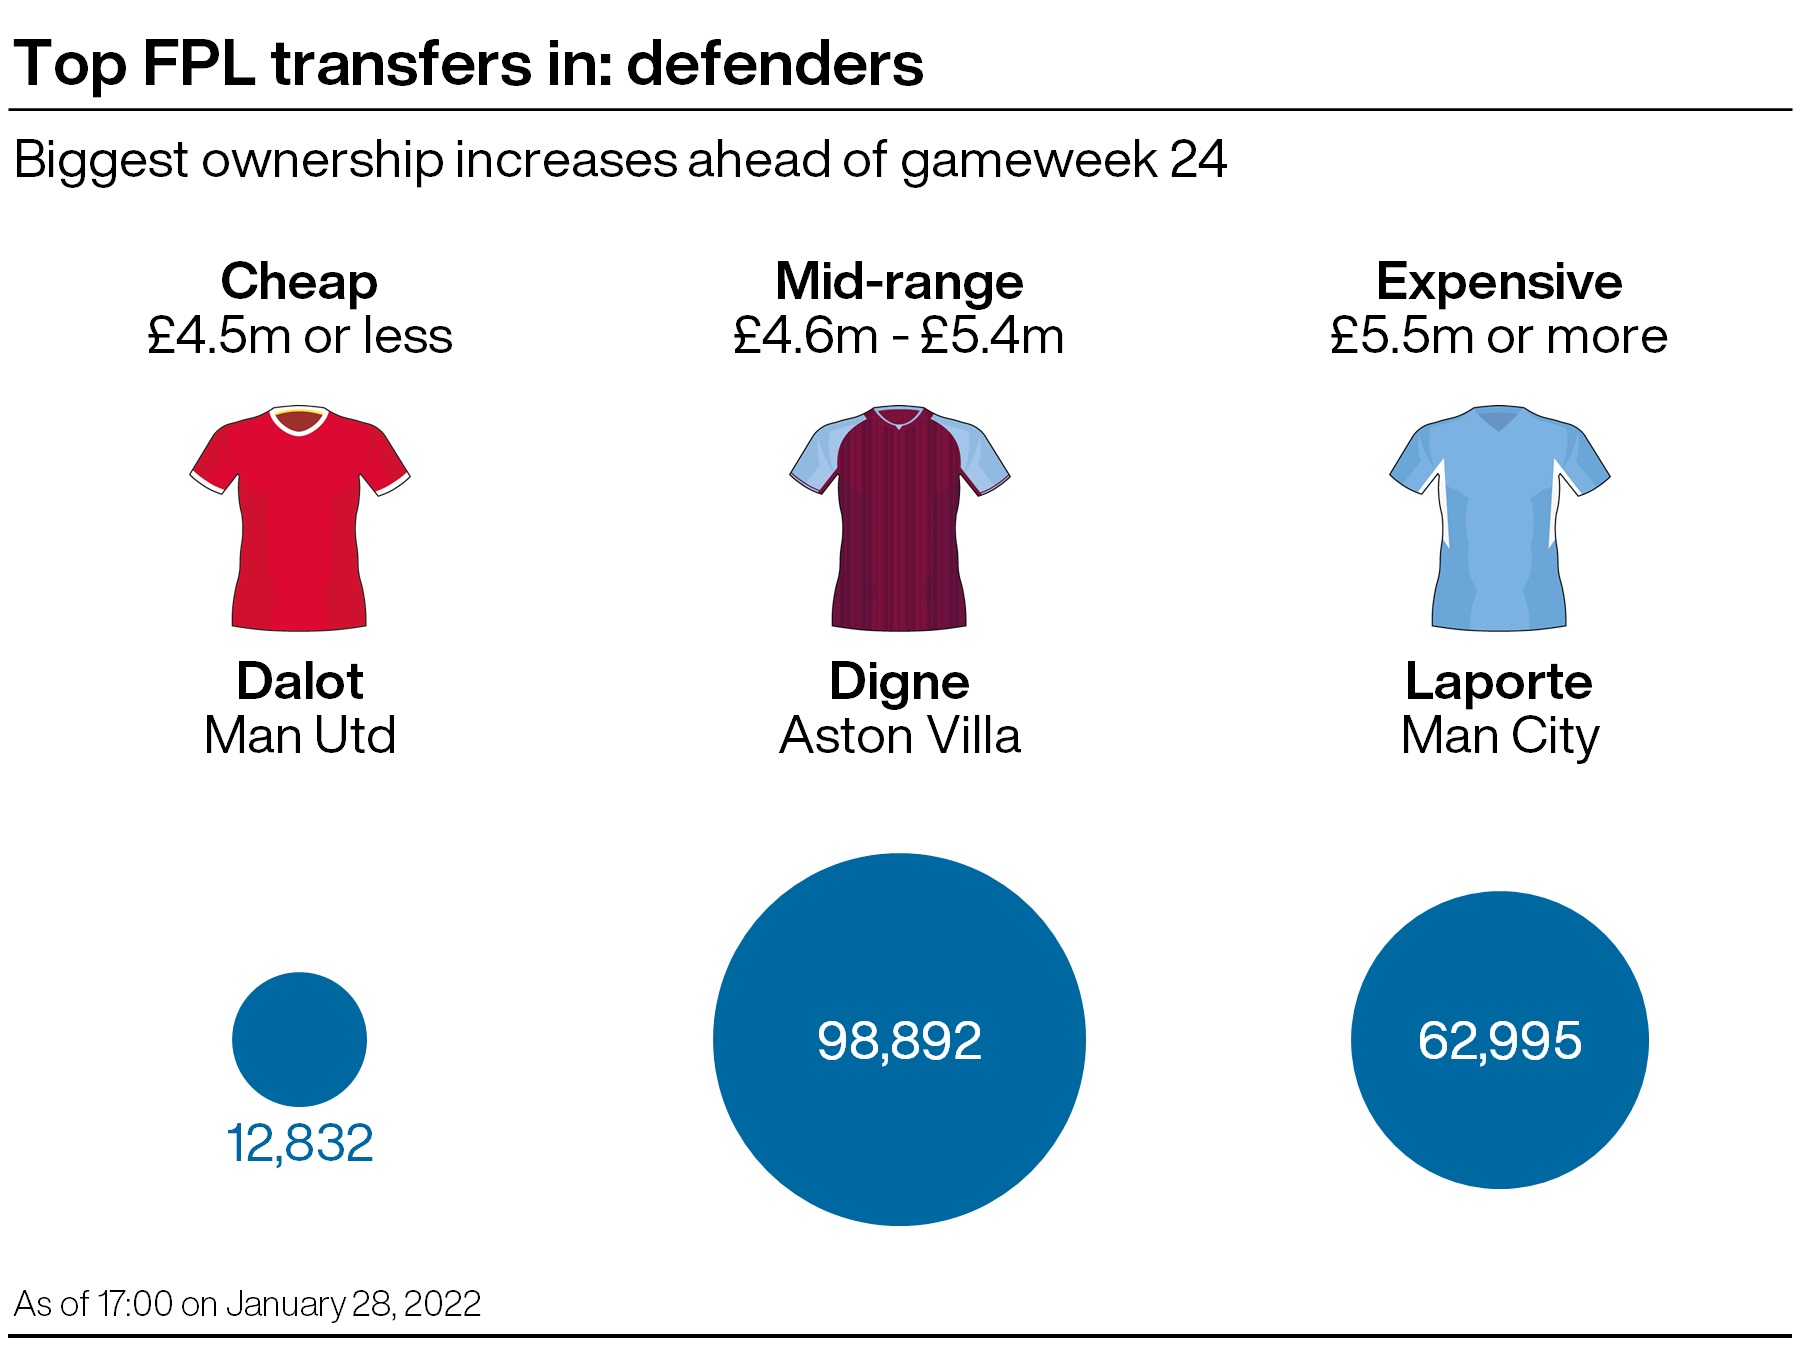 A graphic showing some of the most transferred players in the Fantasy Premier League ahead of gameweek 24